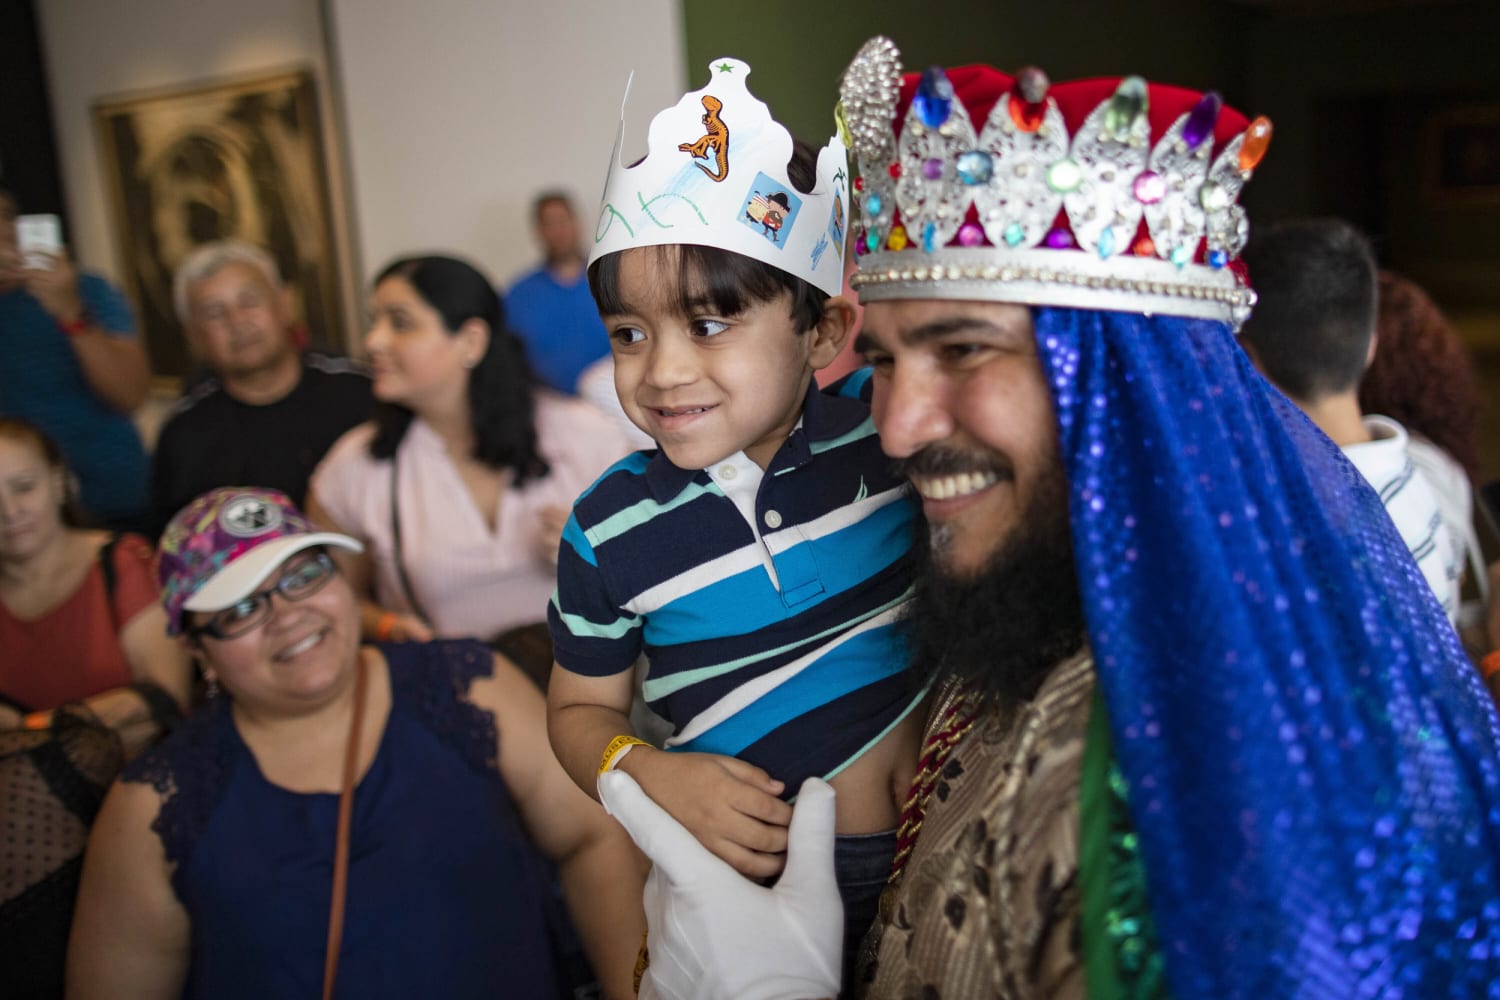 Three Kings Day is big in these Latino households, despite Santa's pull